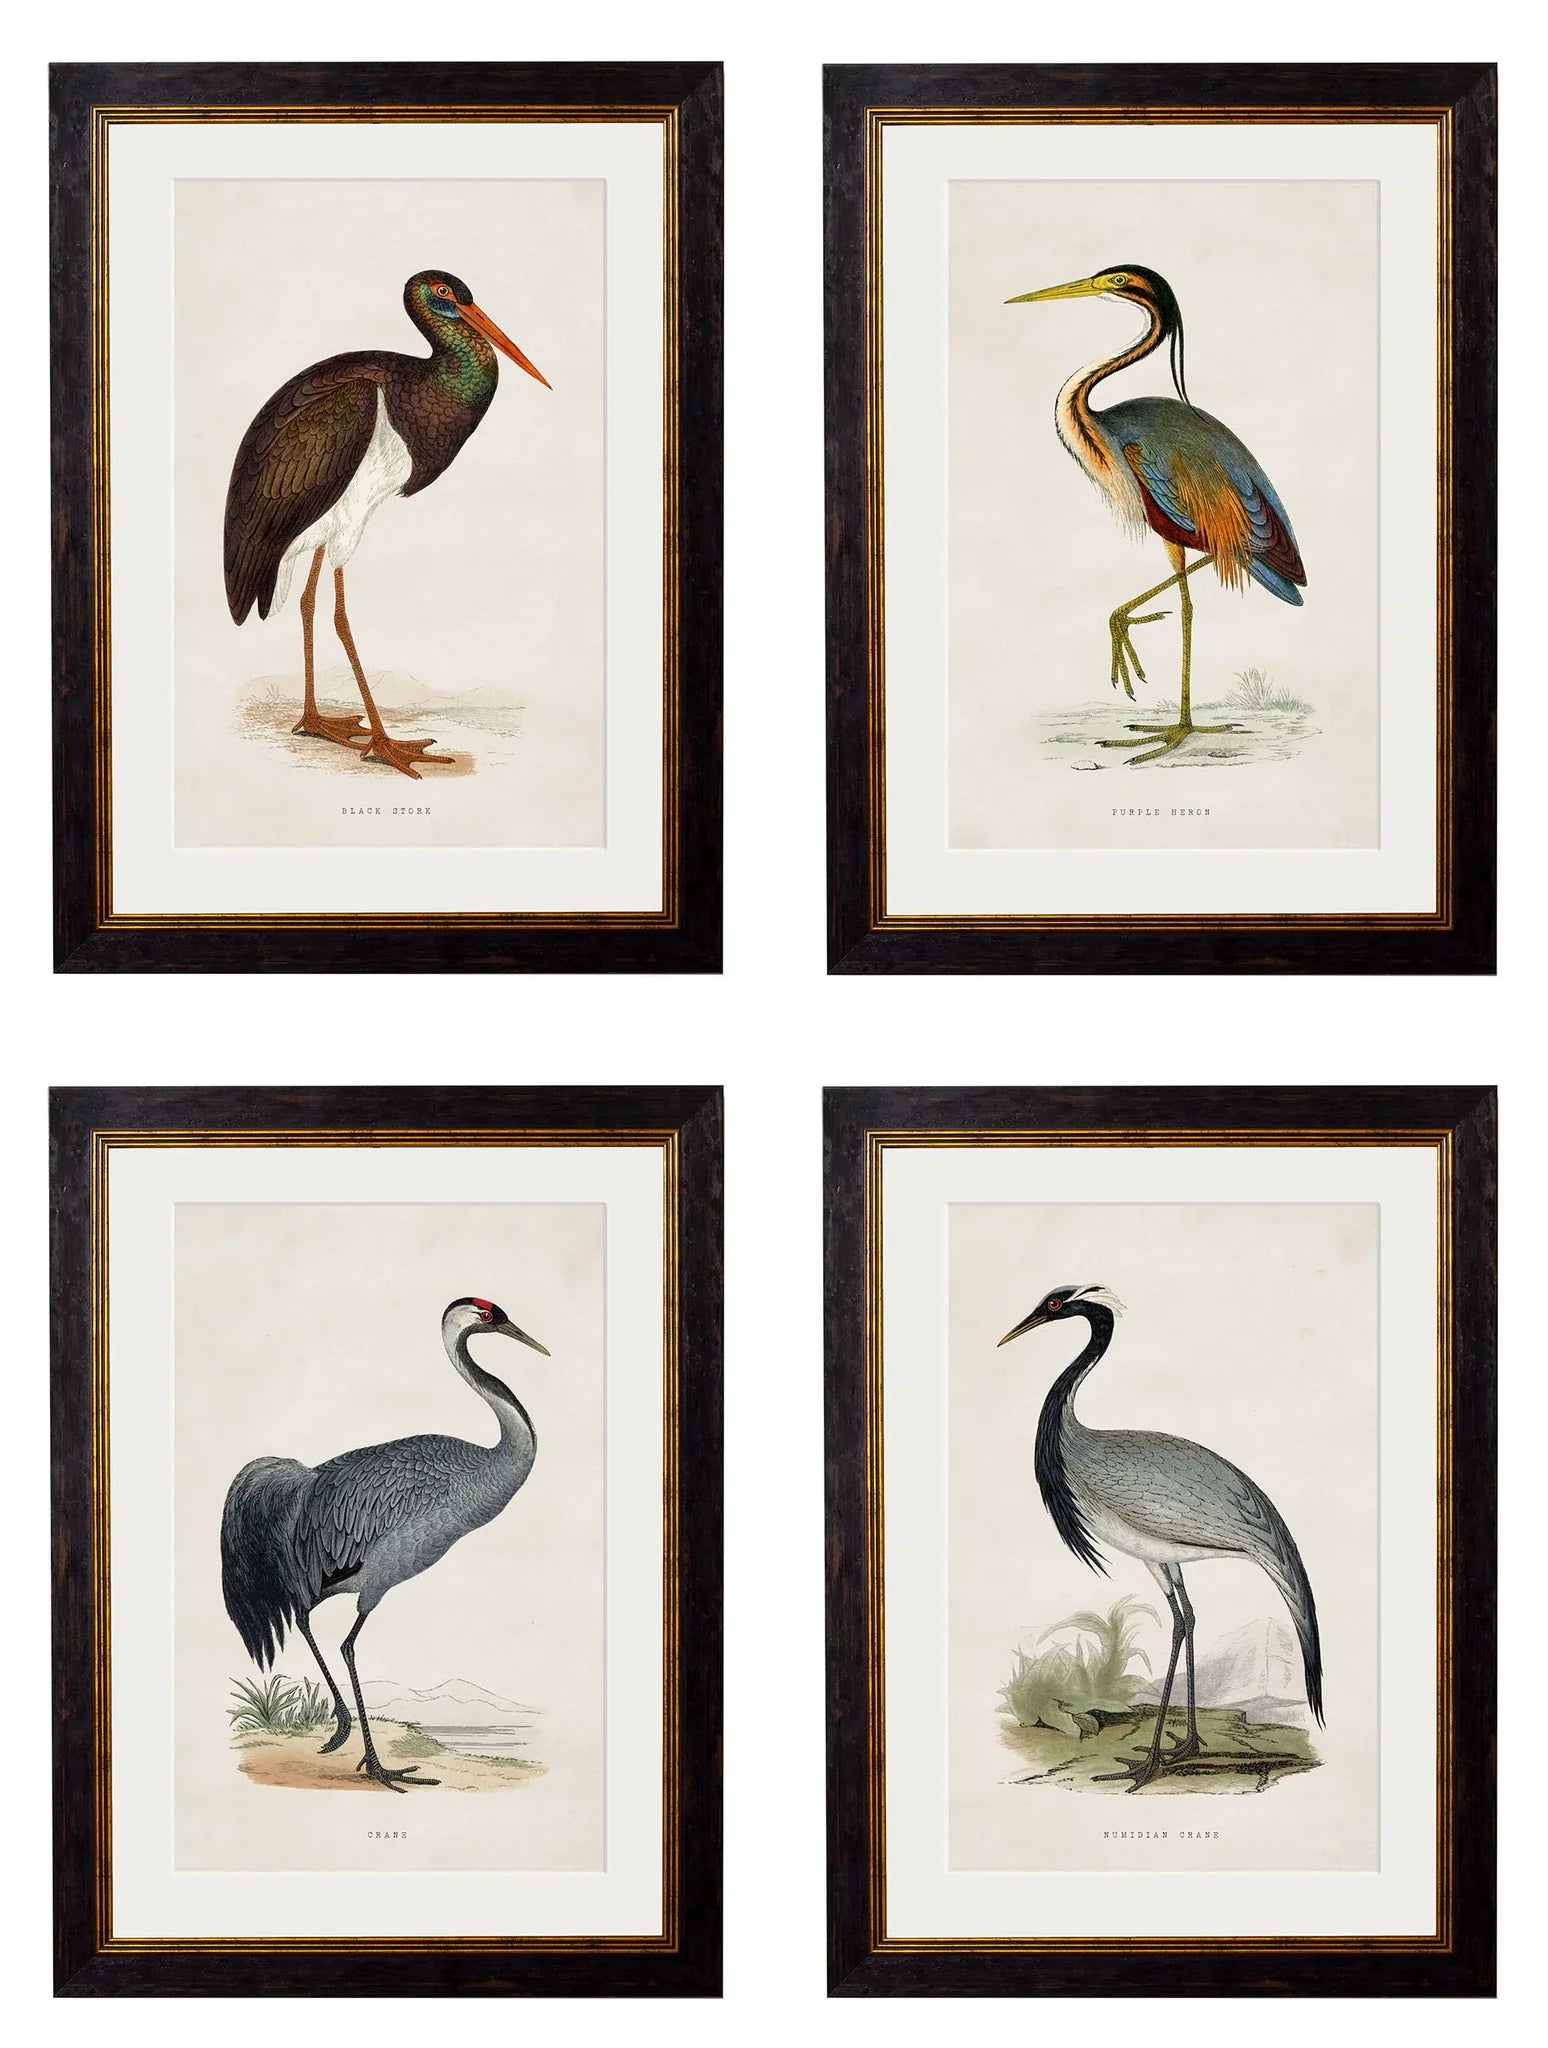 C.1850's British Wading Birds Frames for sale - Woodcock and Cavendish